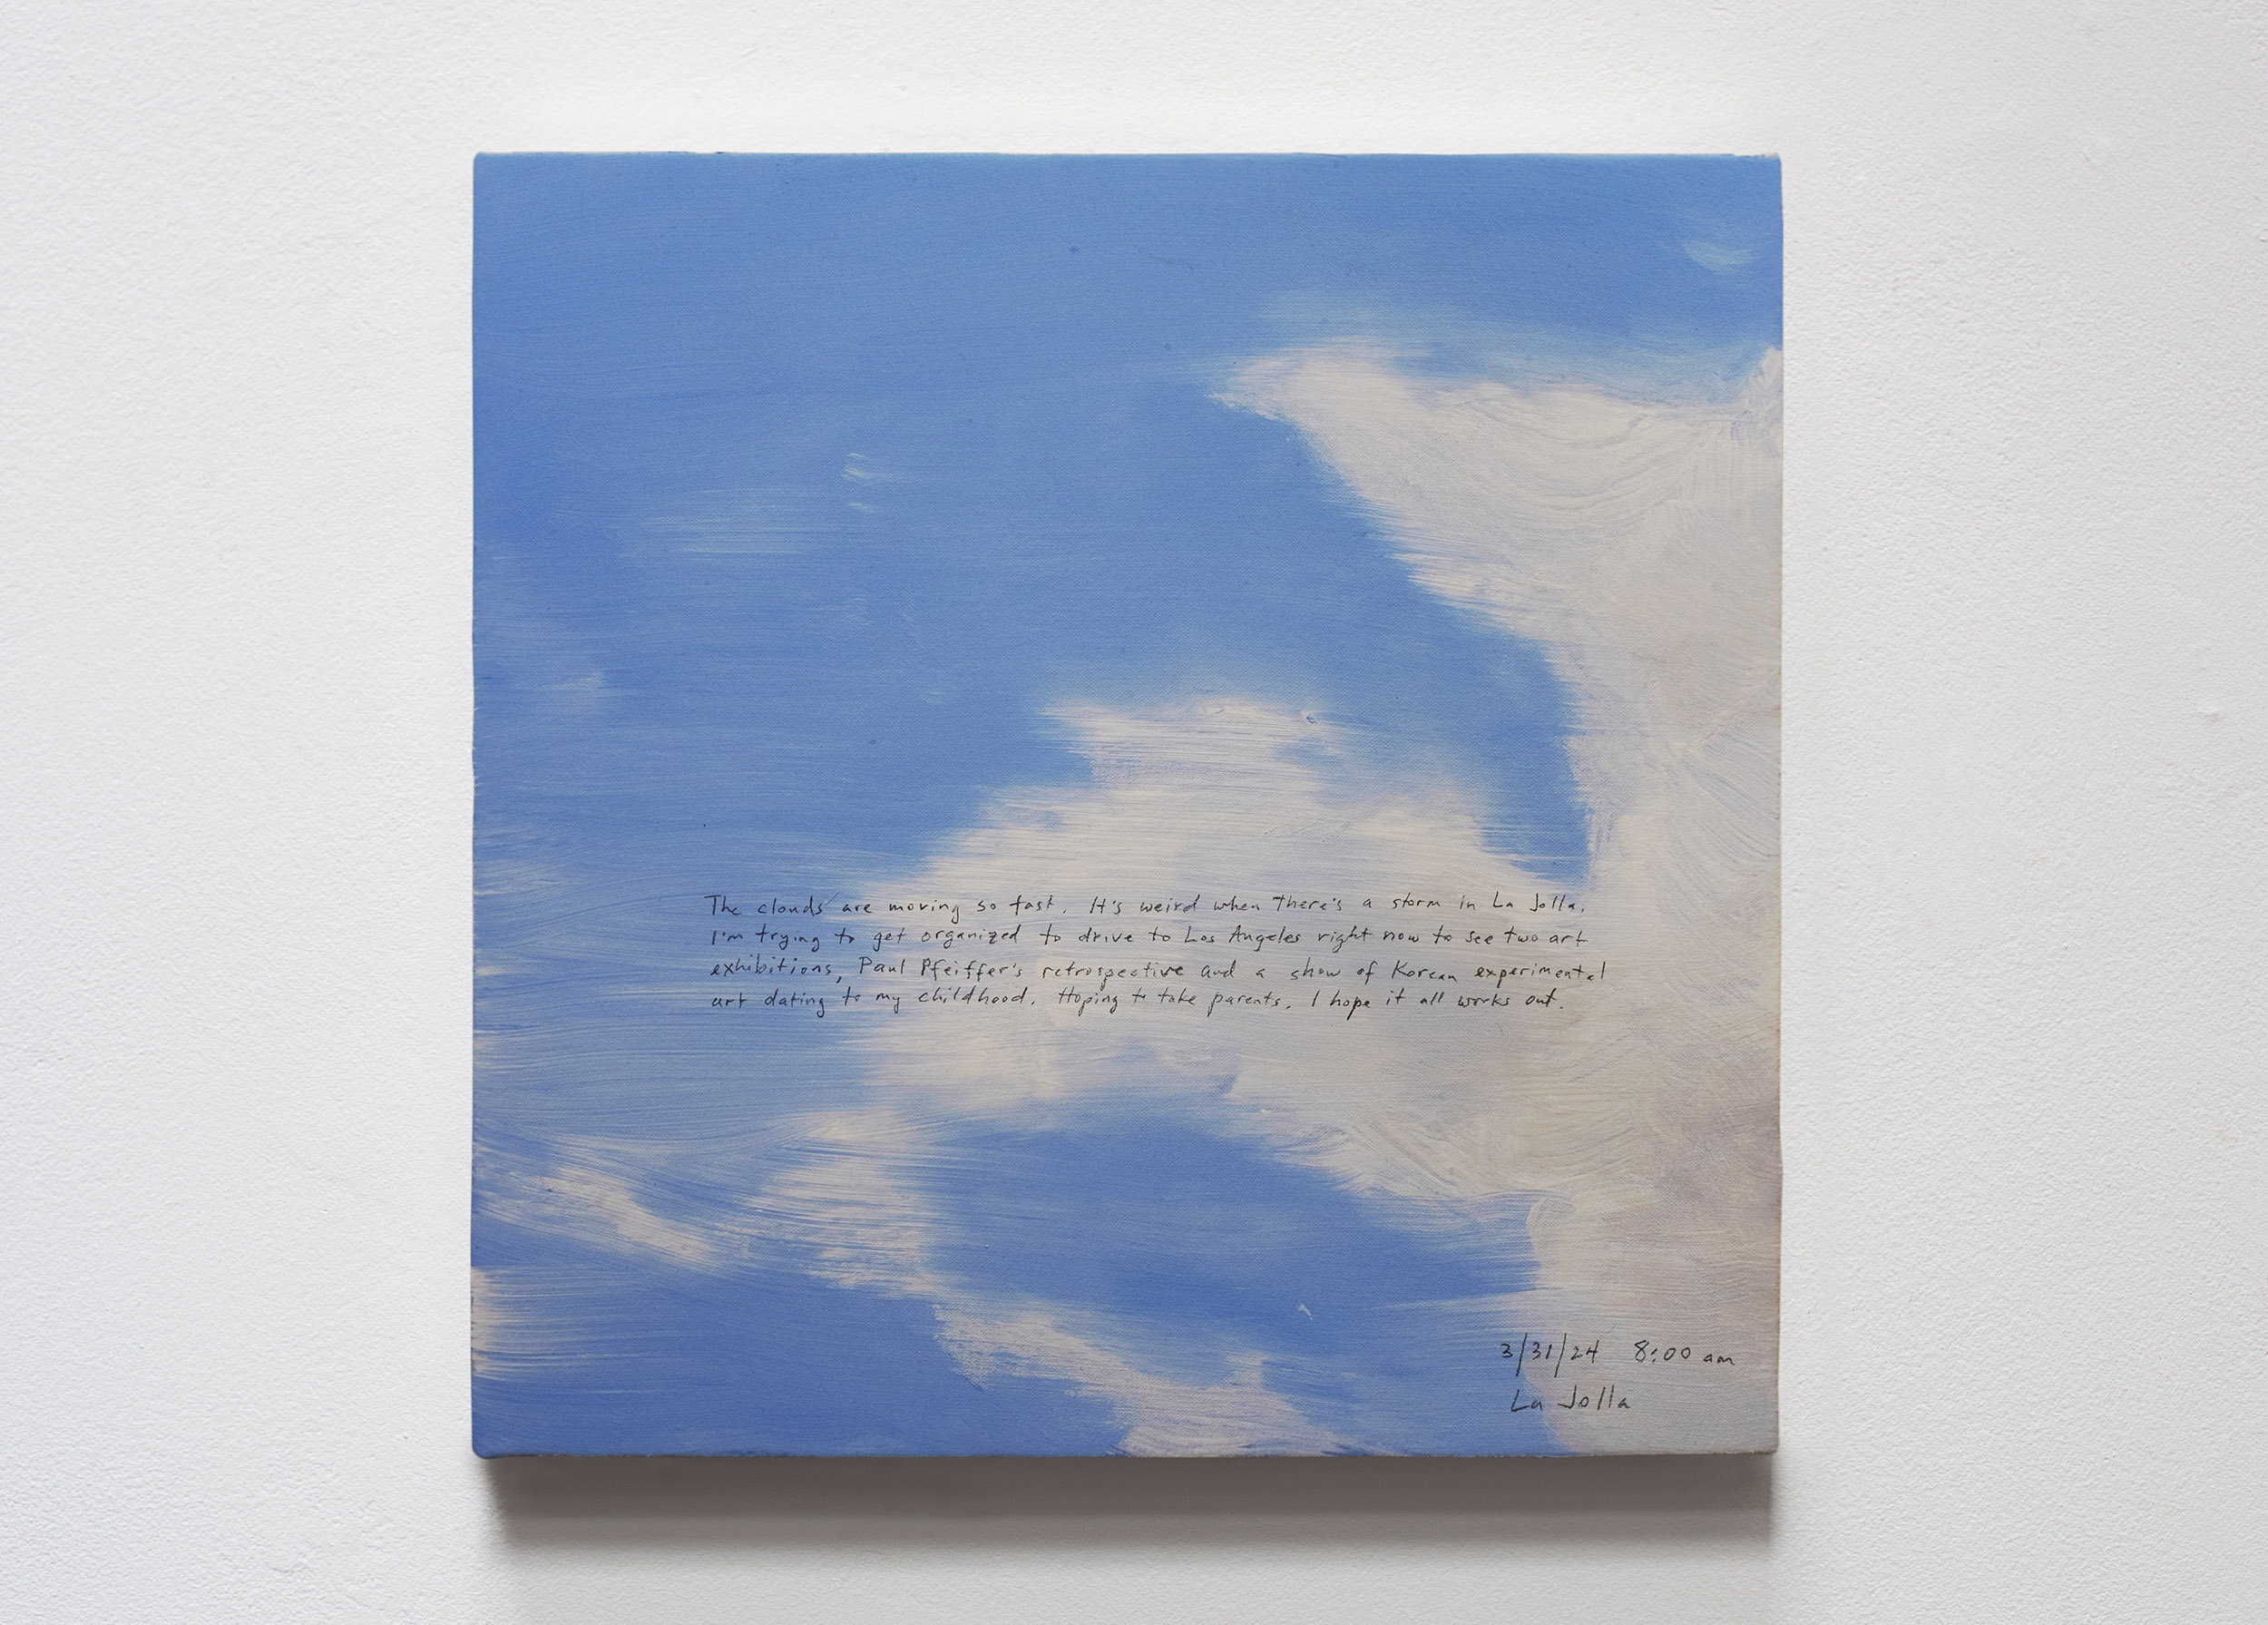 A 14 × 14 inch, acrylic painting of the sky. A journal entry is handwritten on the painting:

“The clouds are moving so fast. It’s weird when there’s a storm in La Jolla. I’m trying to get organized to drive to Los Angeles right now to see two art exhibitions, Paul Pfeiffer’s retrospective and a show of Korean experimental art dating to my childhood. Hoping to take parents. I hope it all works out. 

3/31/24 8:00 am
La Jolla”